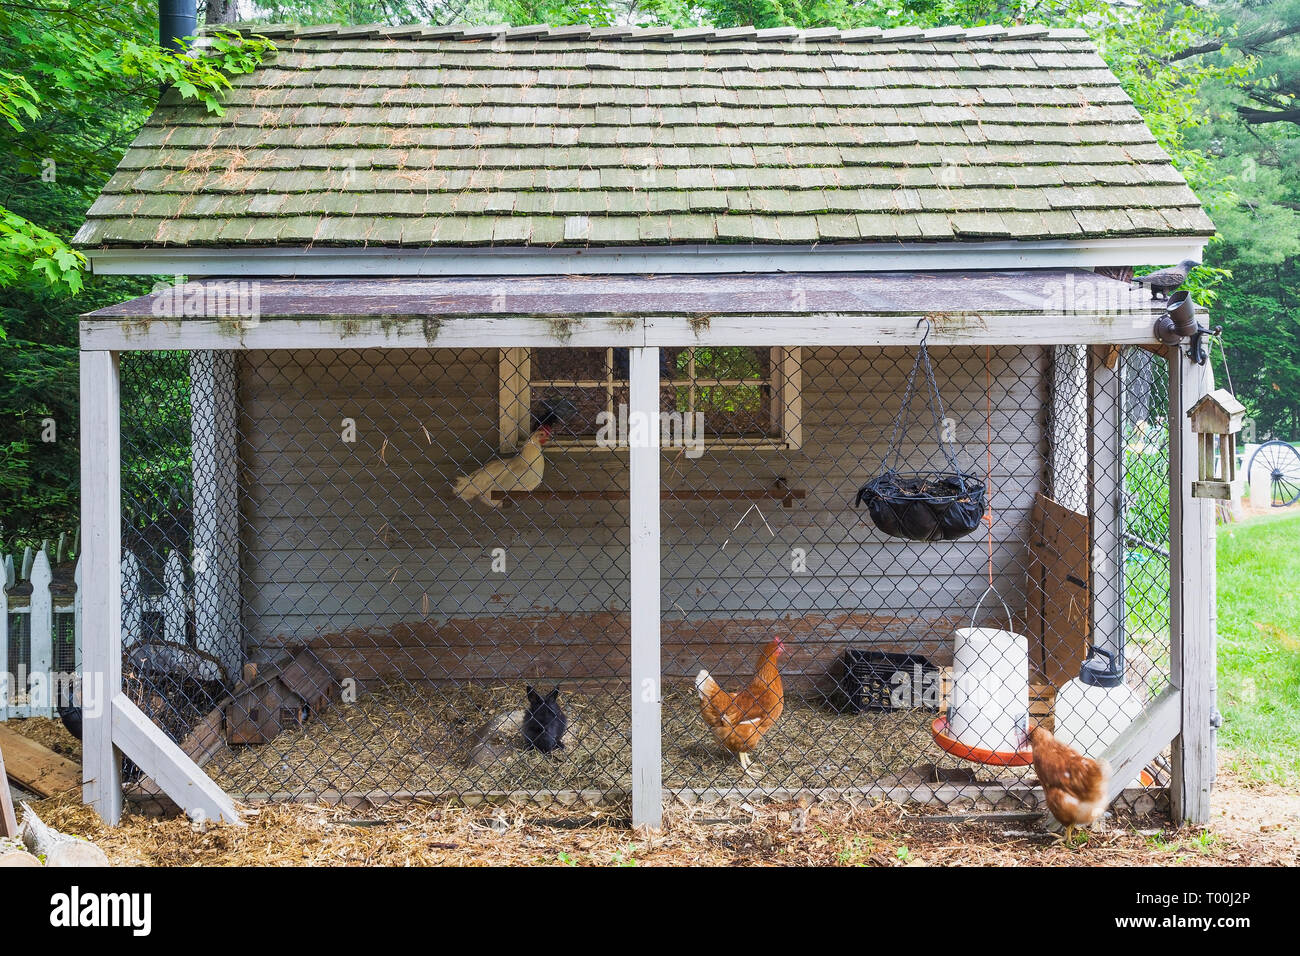 Chicken coop with cedar shingles roof in residential backyard in early summer Stock Photo